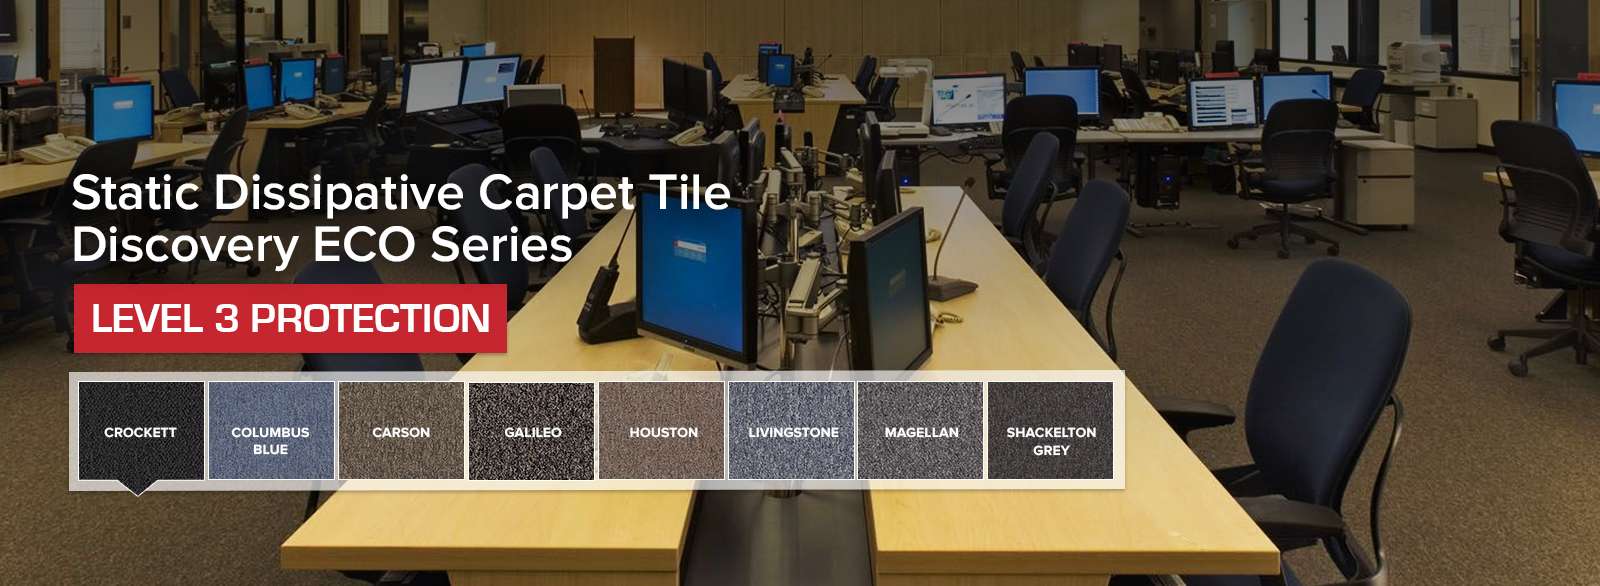 Static Dissipative Carpet Tile Discovery ECO Series